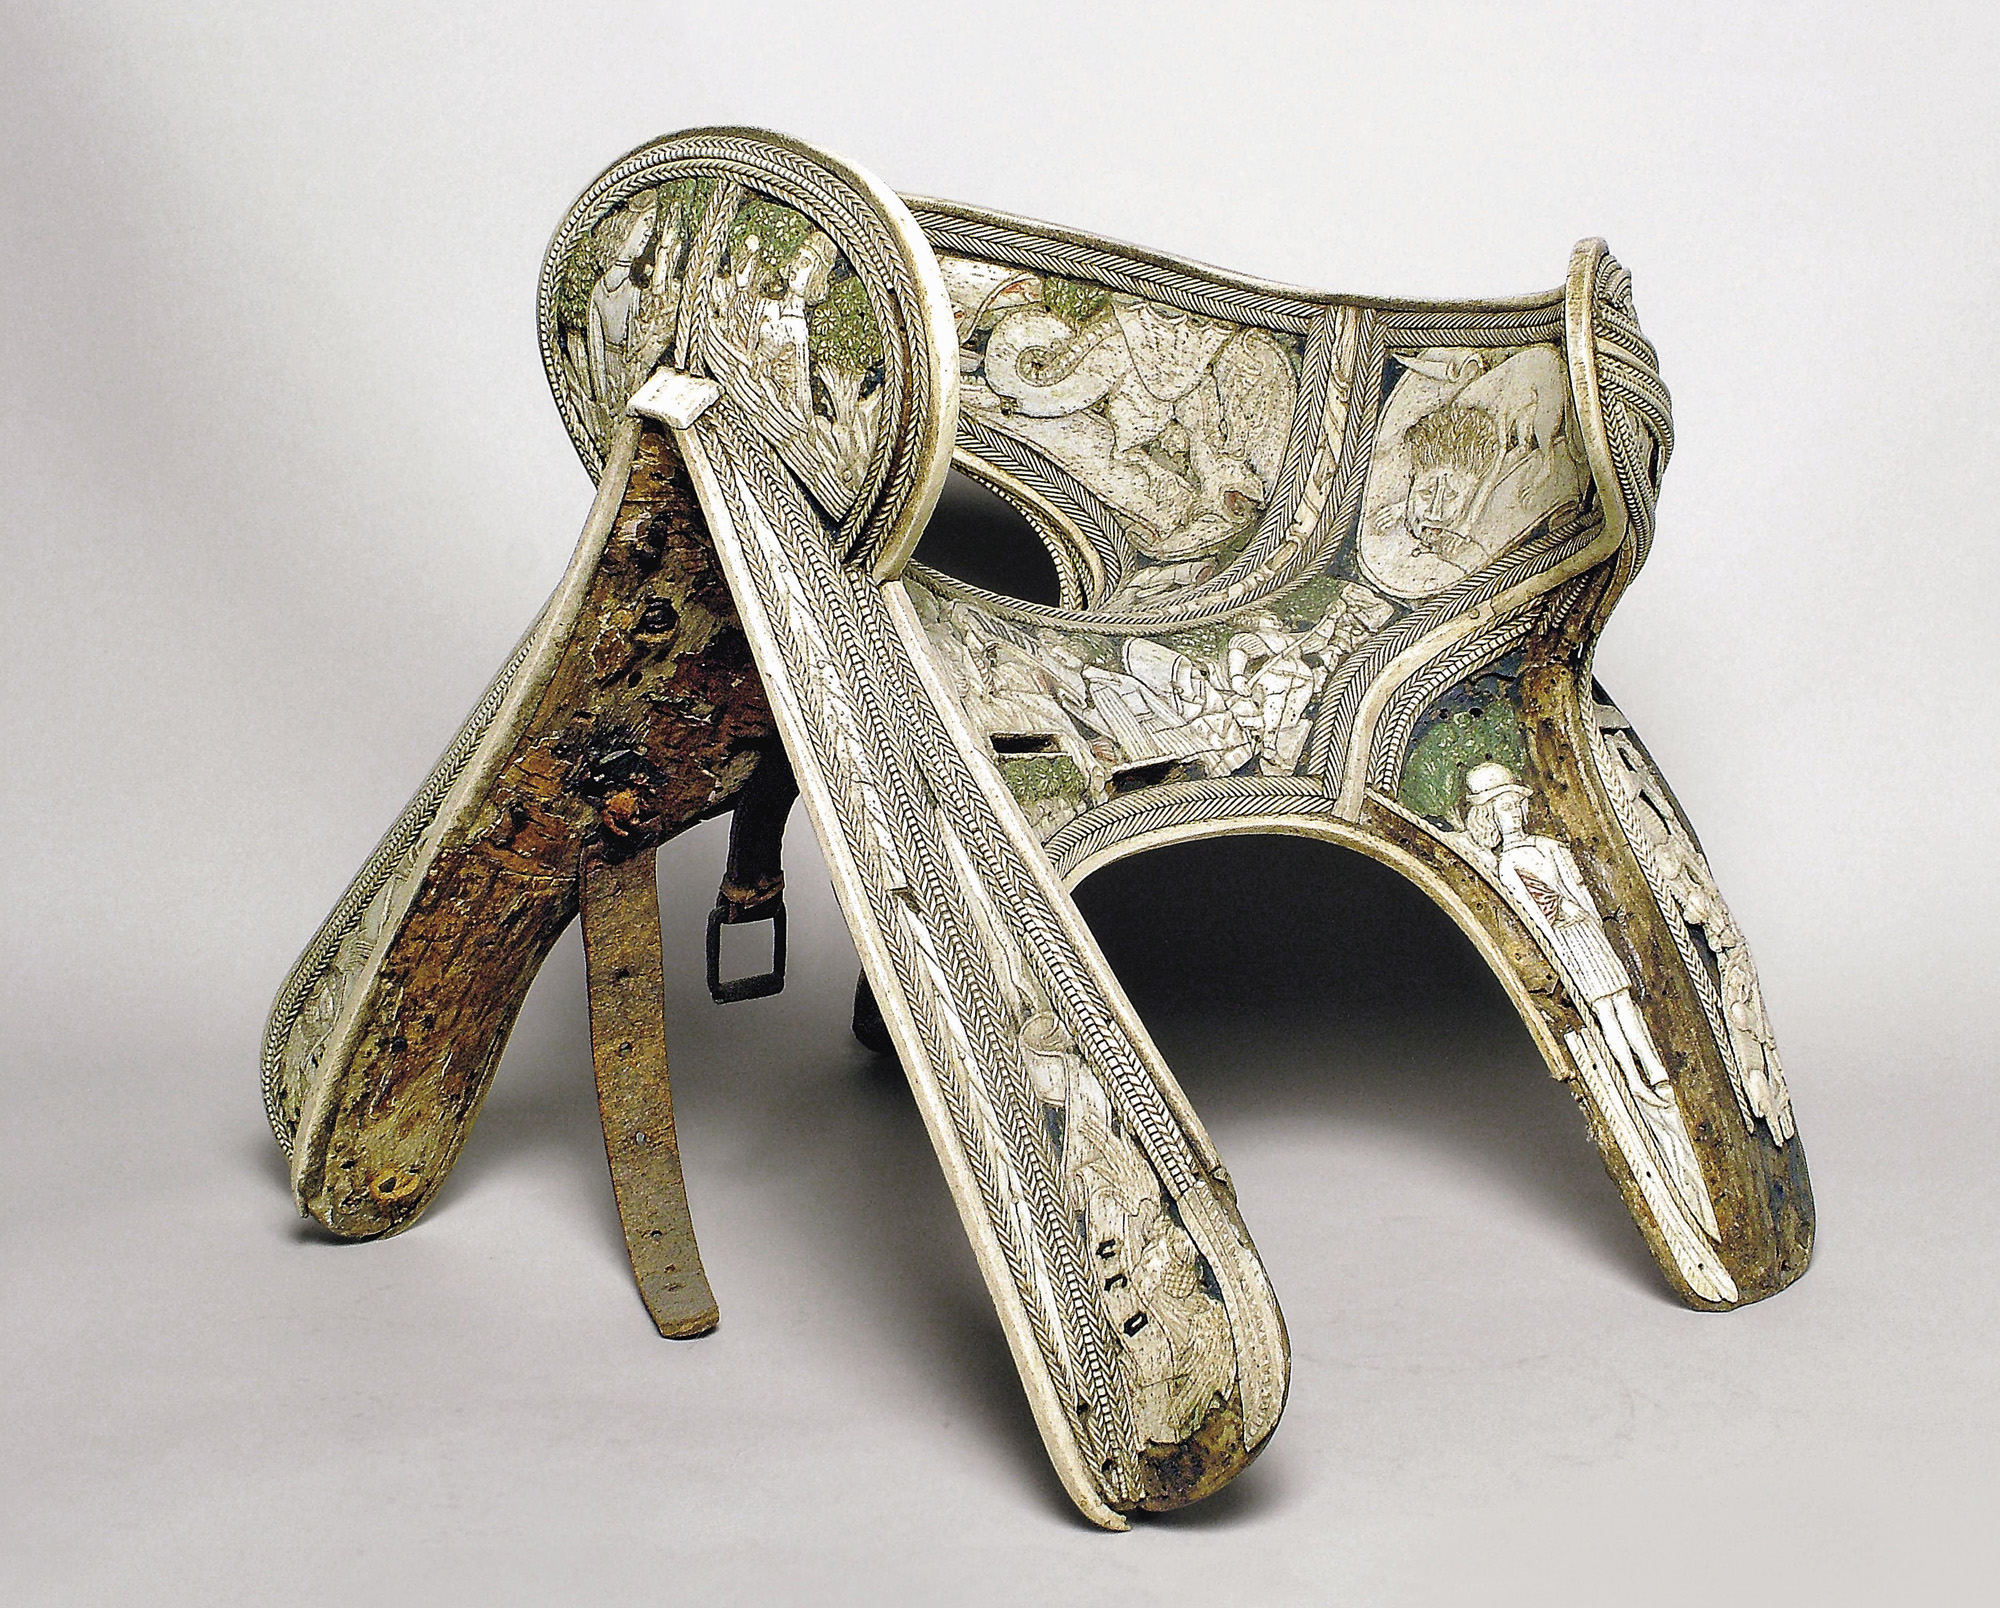 Ceremonial saddle, Italy, second half of the 15th century. Florence, Museo Nazionale del Bargello